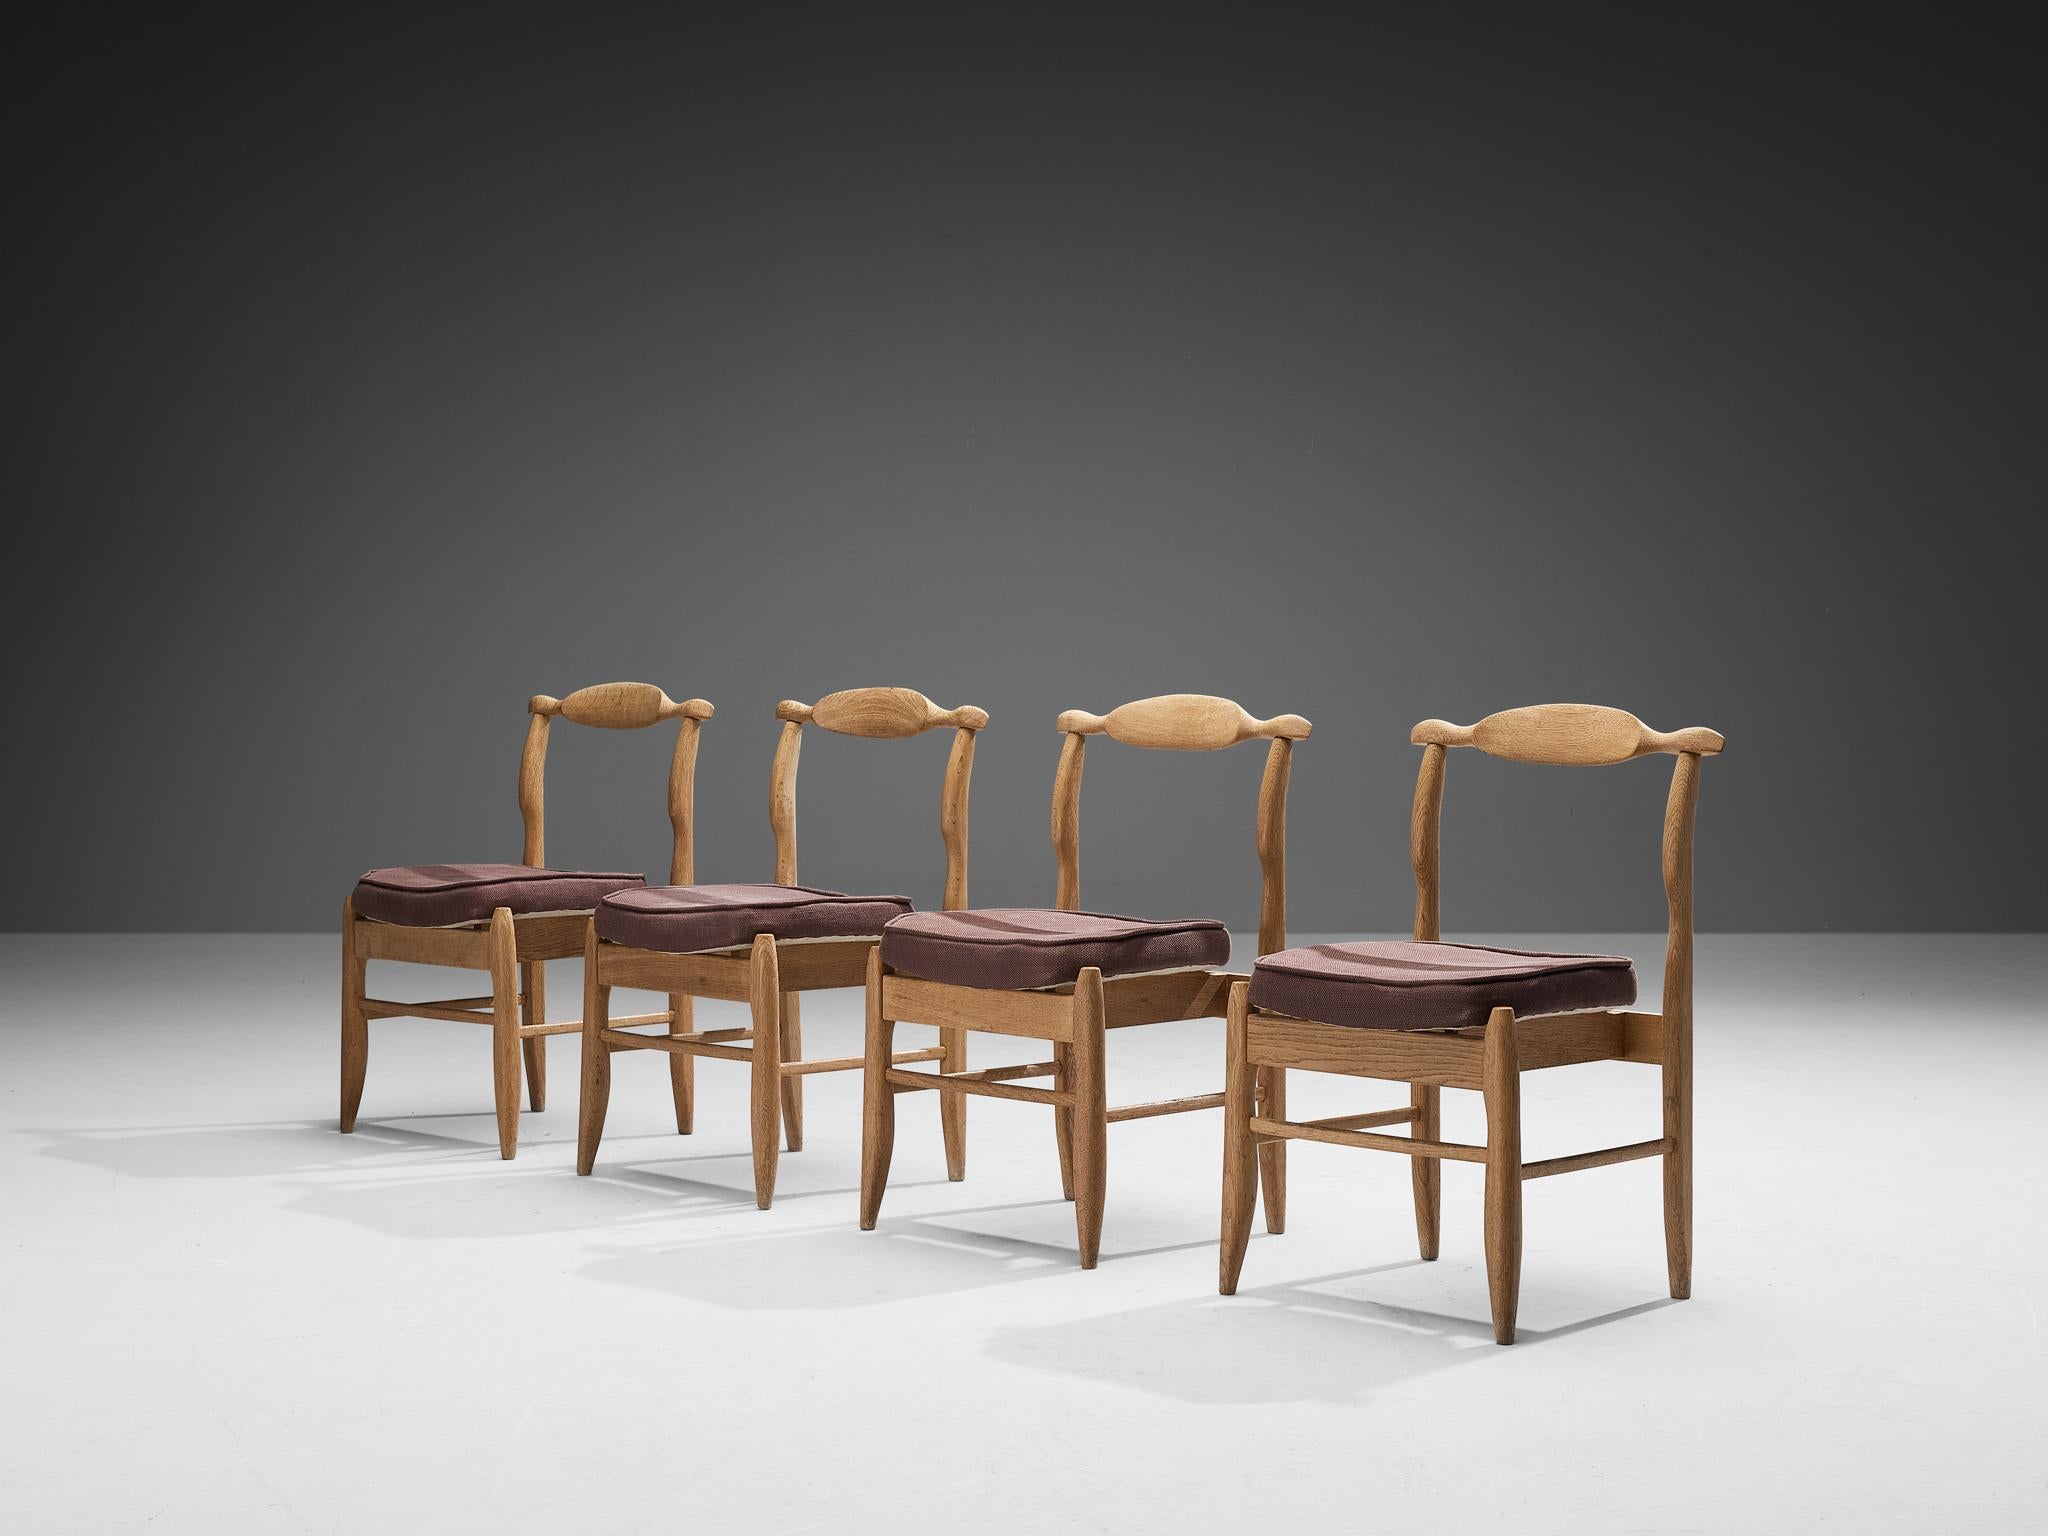 Guillerme et Chambron, set of four dining chairs model 'Fumay', oak, fabric, France, 1960s

Beautifully shaped chairs in patinated oak by French designer duo Jacques Chambron and Robert Guillerme. These dining chairs show beautiful lines in every